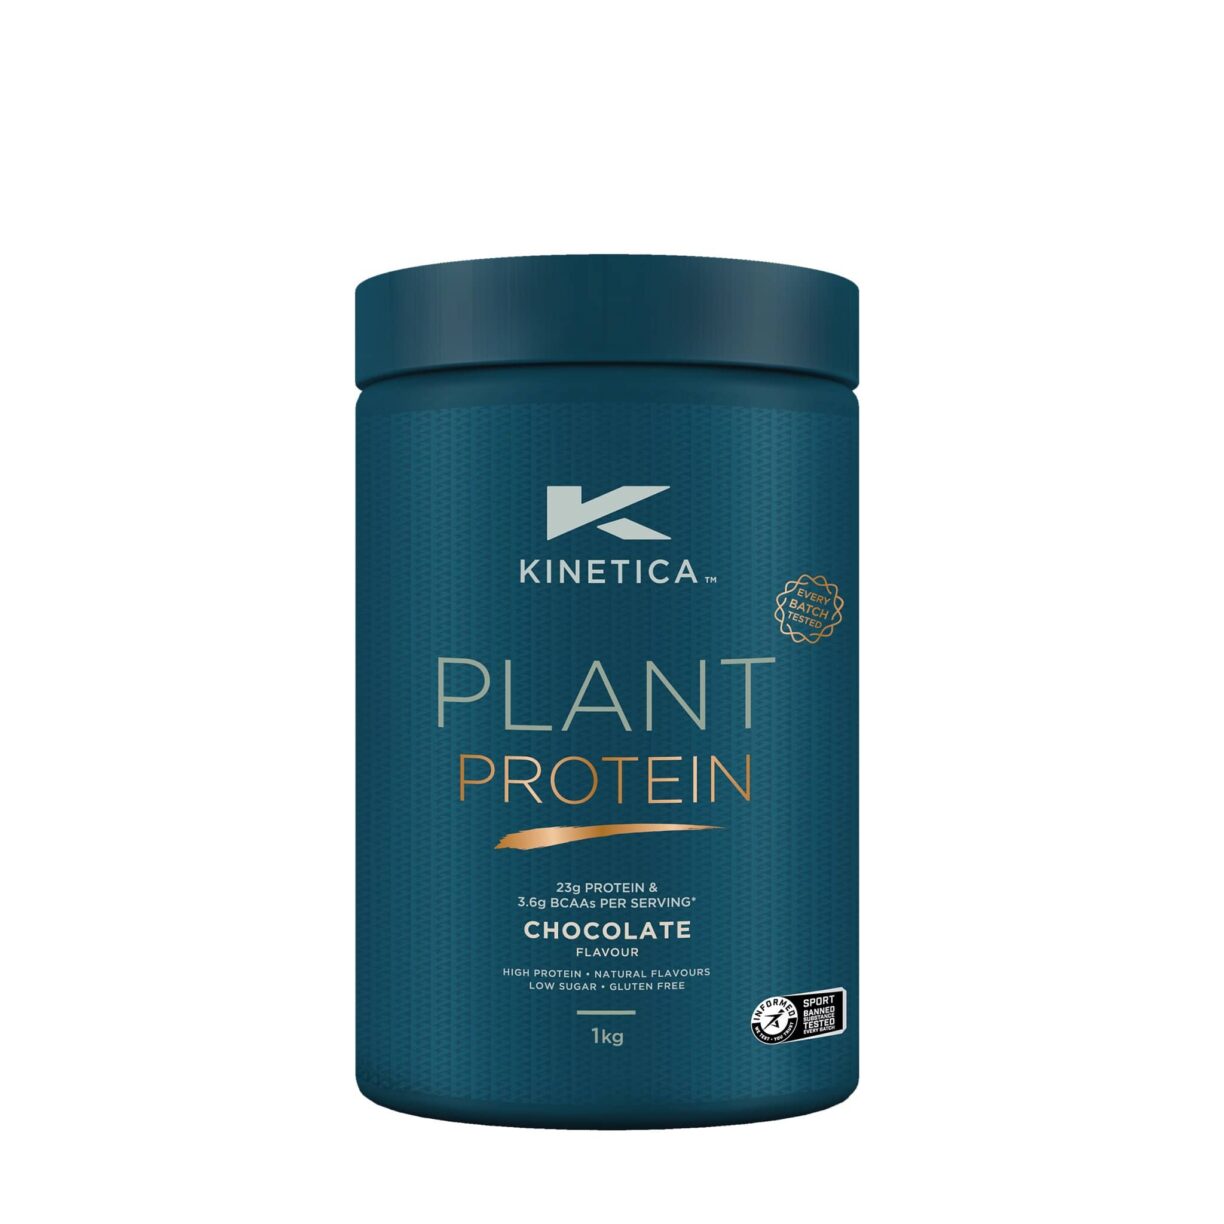 Plant protein kinetica